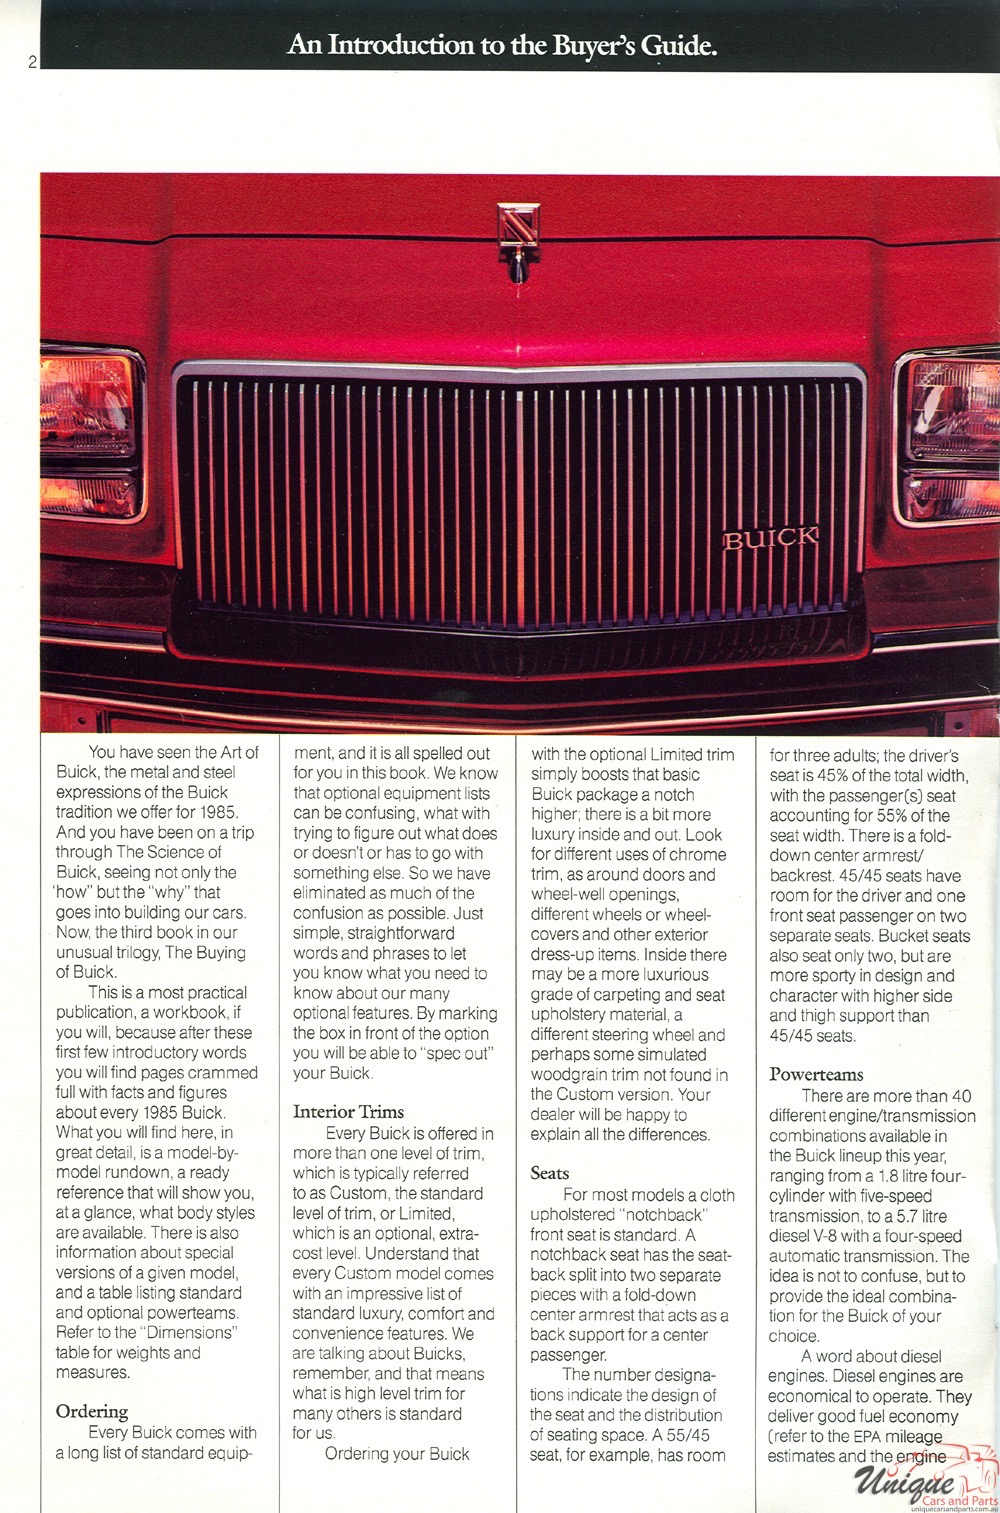 1985 Buick Buying Guide Page 25